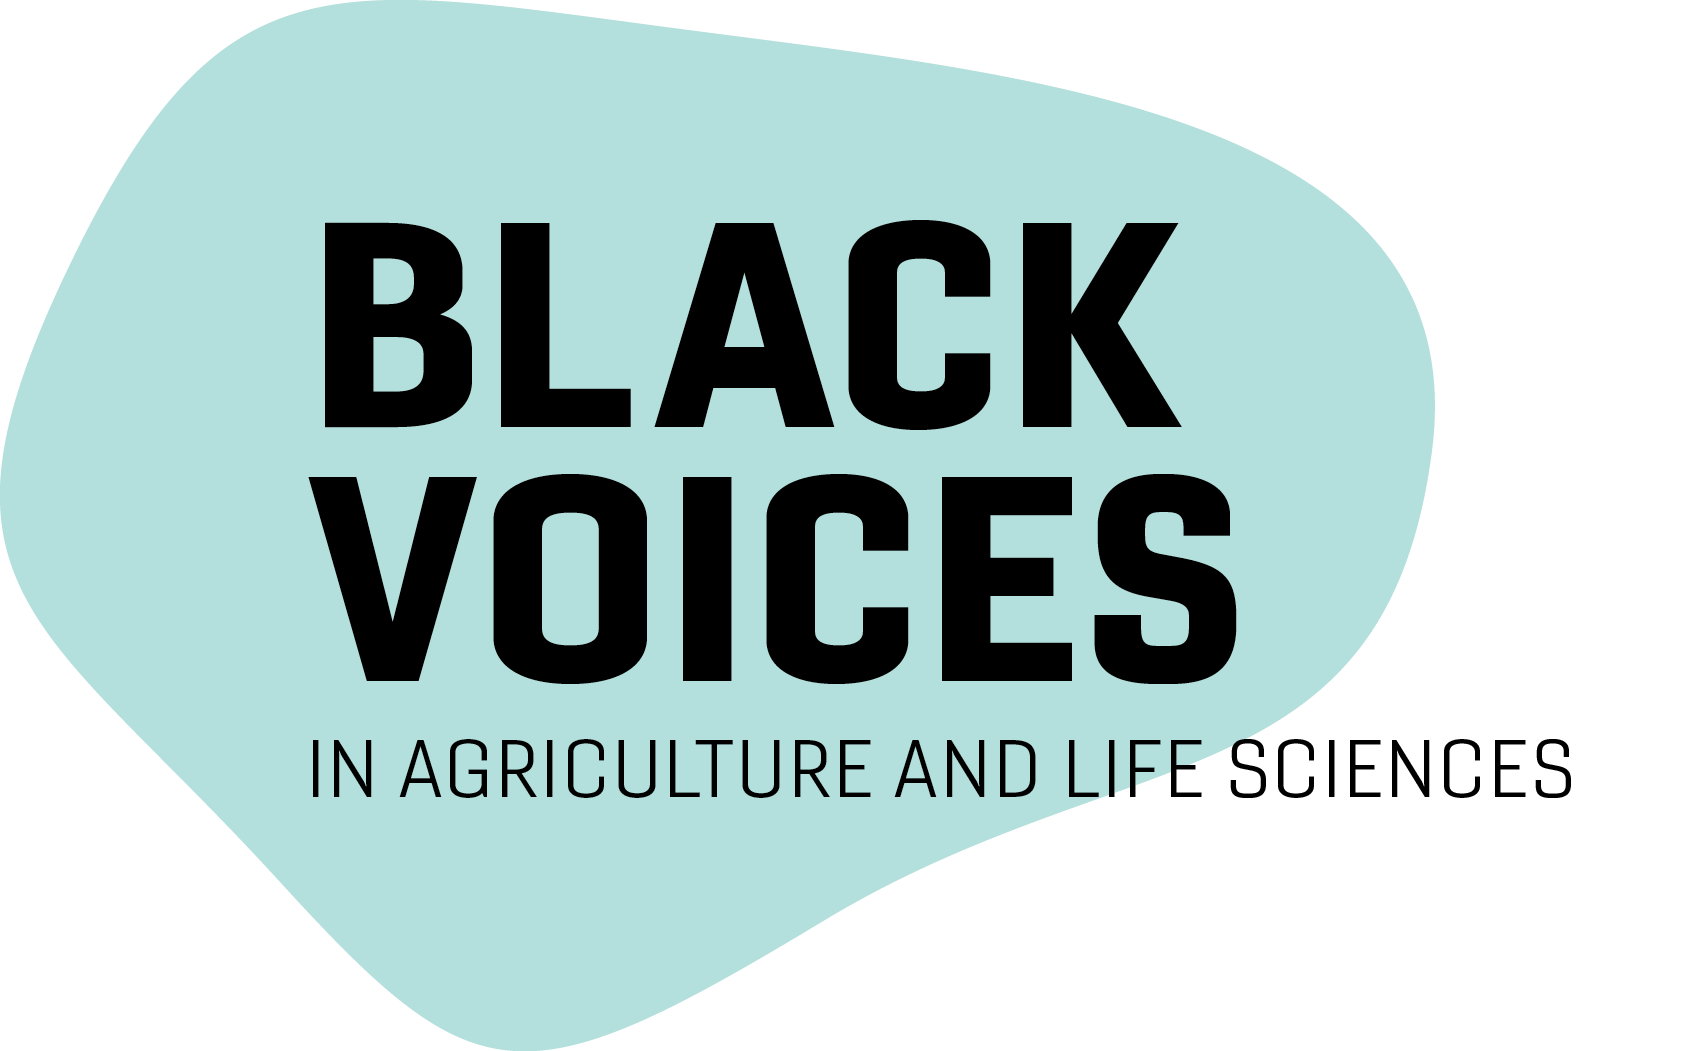 Black voices in agriculture and life sciences